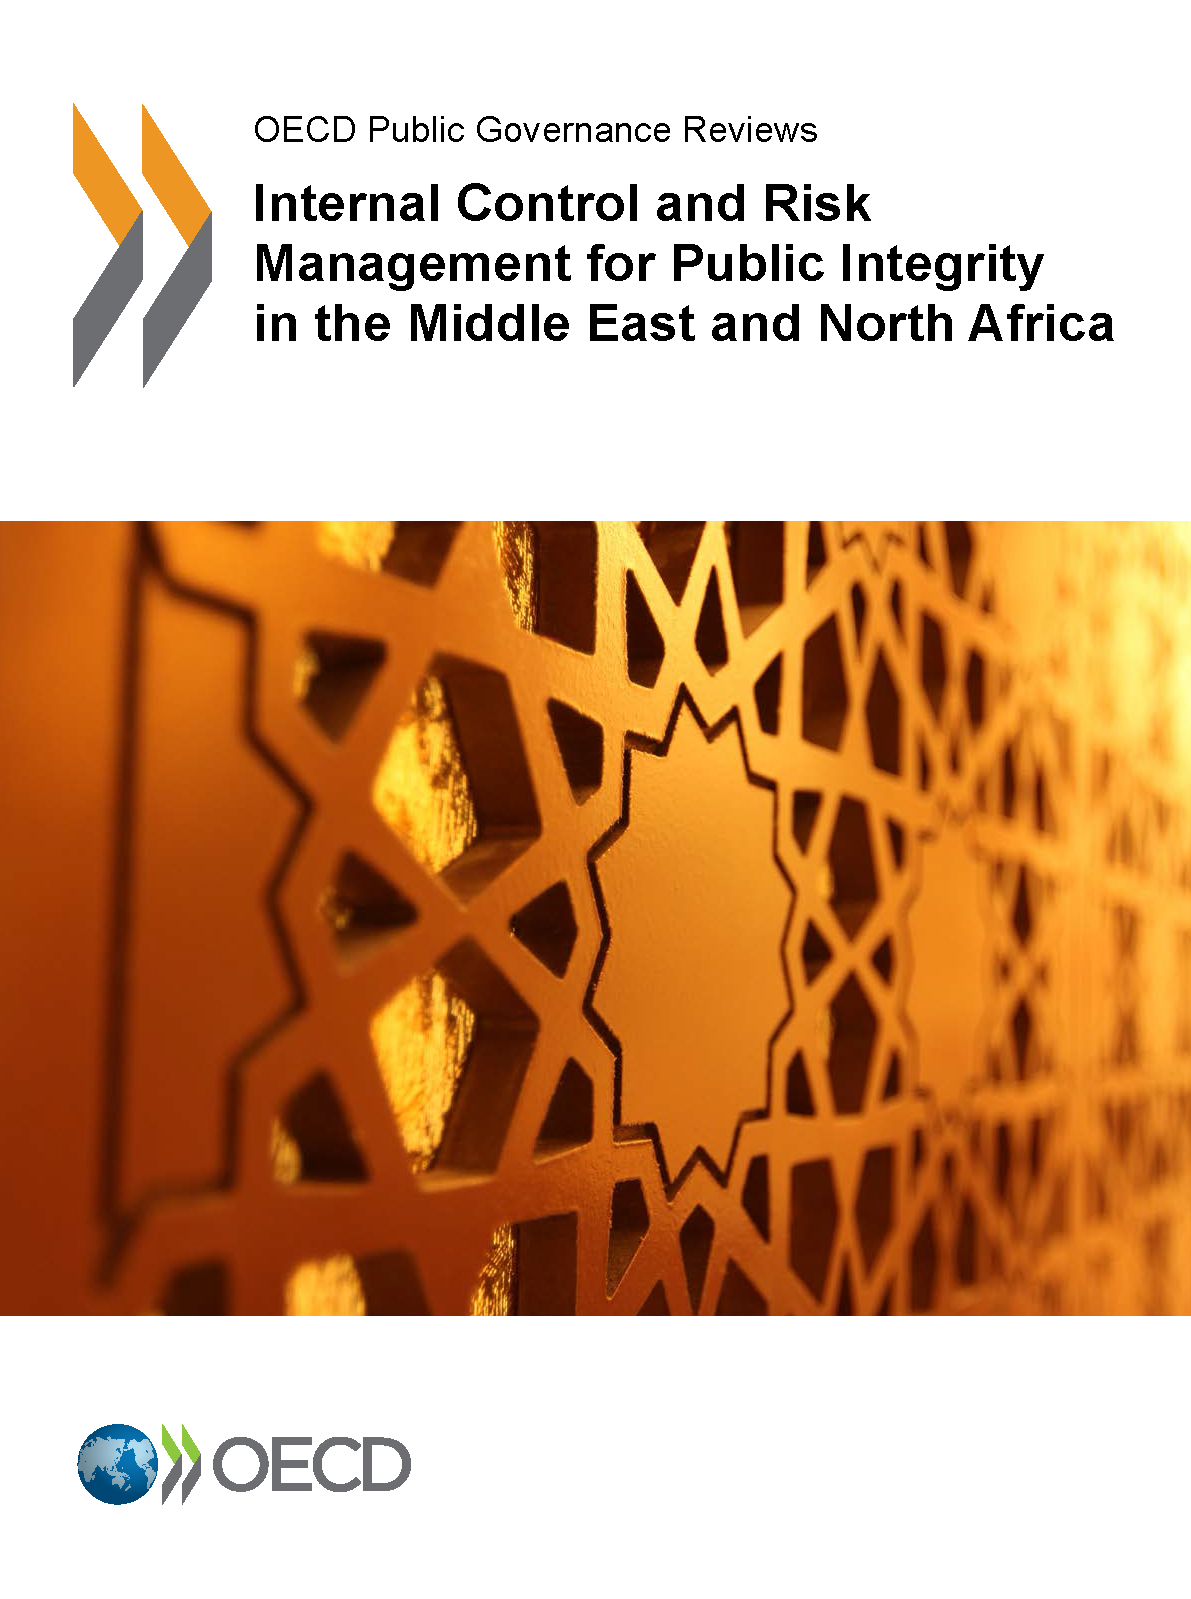 Accounting and auditing research tools and strategies 8th edition pdf Internal Control And Risk Management For Public Integrity In The Middle East And North Africa